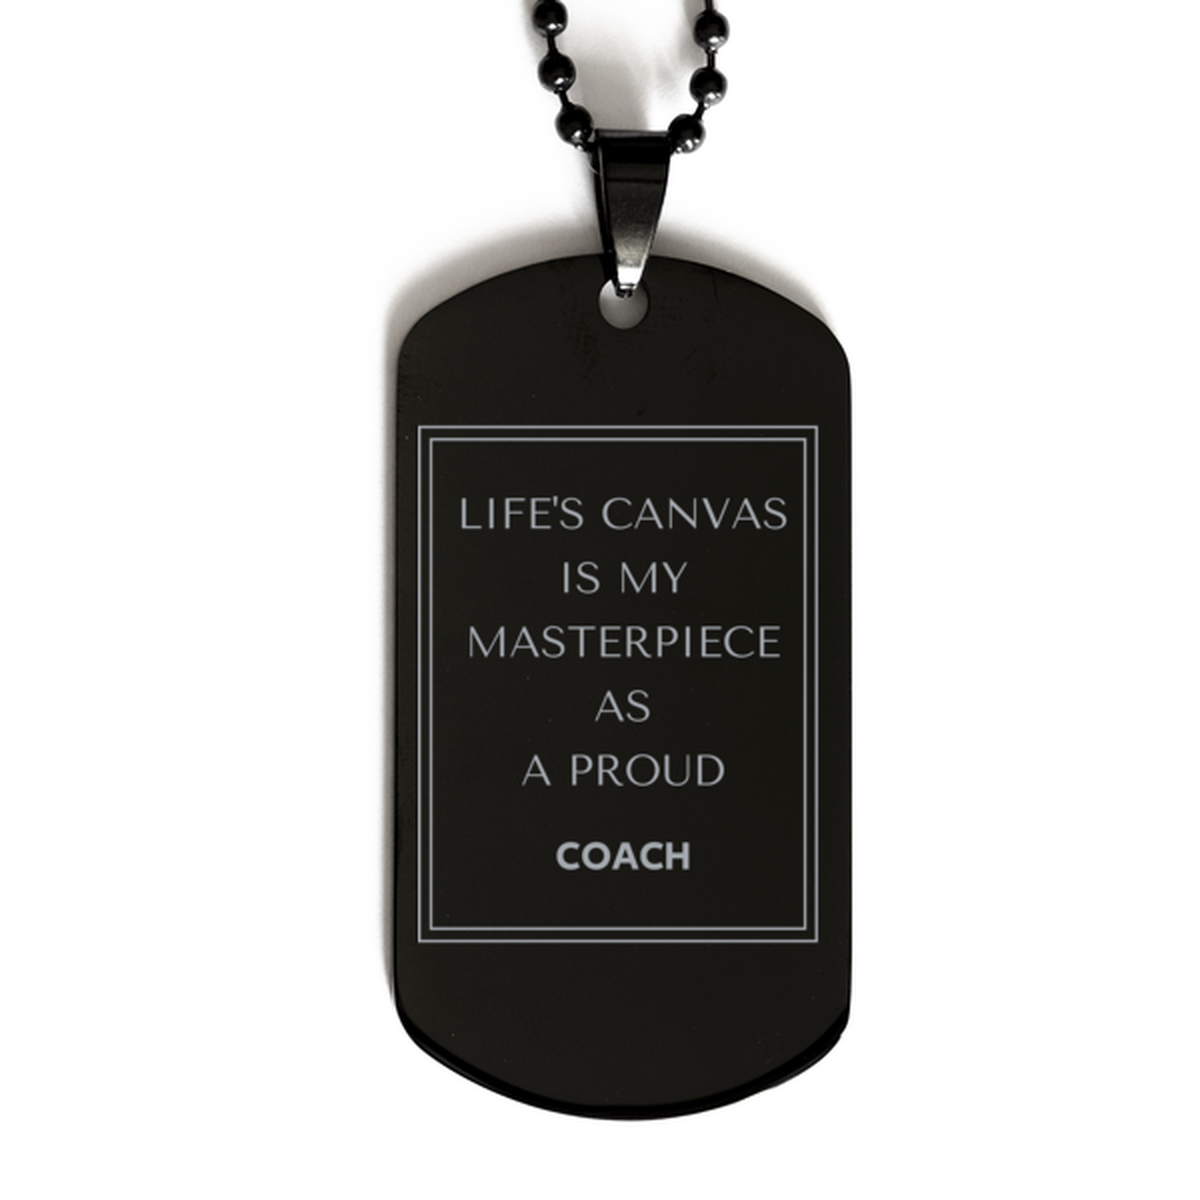 Proud Coach Gifts, Life's canvas is my masterpiece, Epic Birthday Christmas Unique Black Dog Tag For Coach, Coworkers, Men, Women, Friends